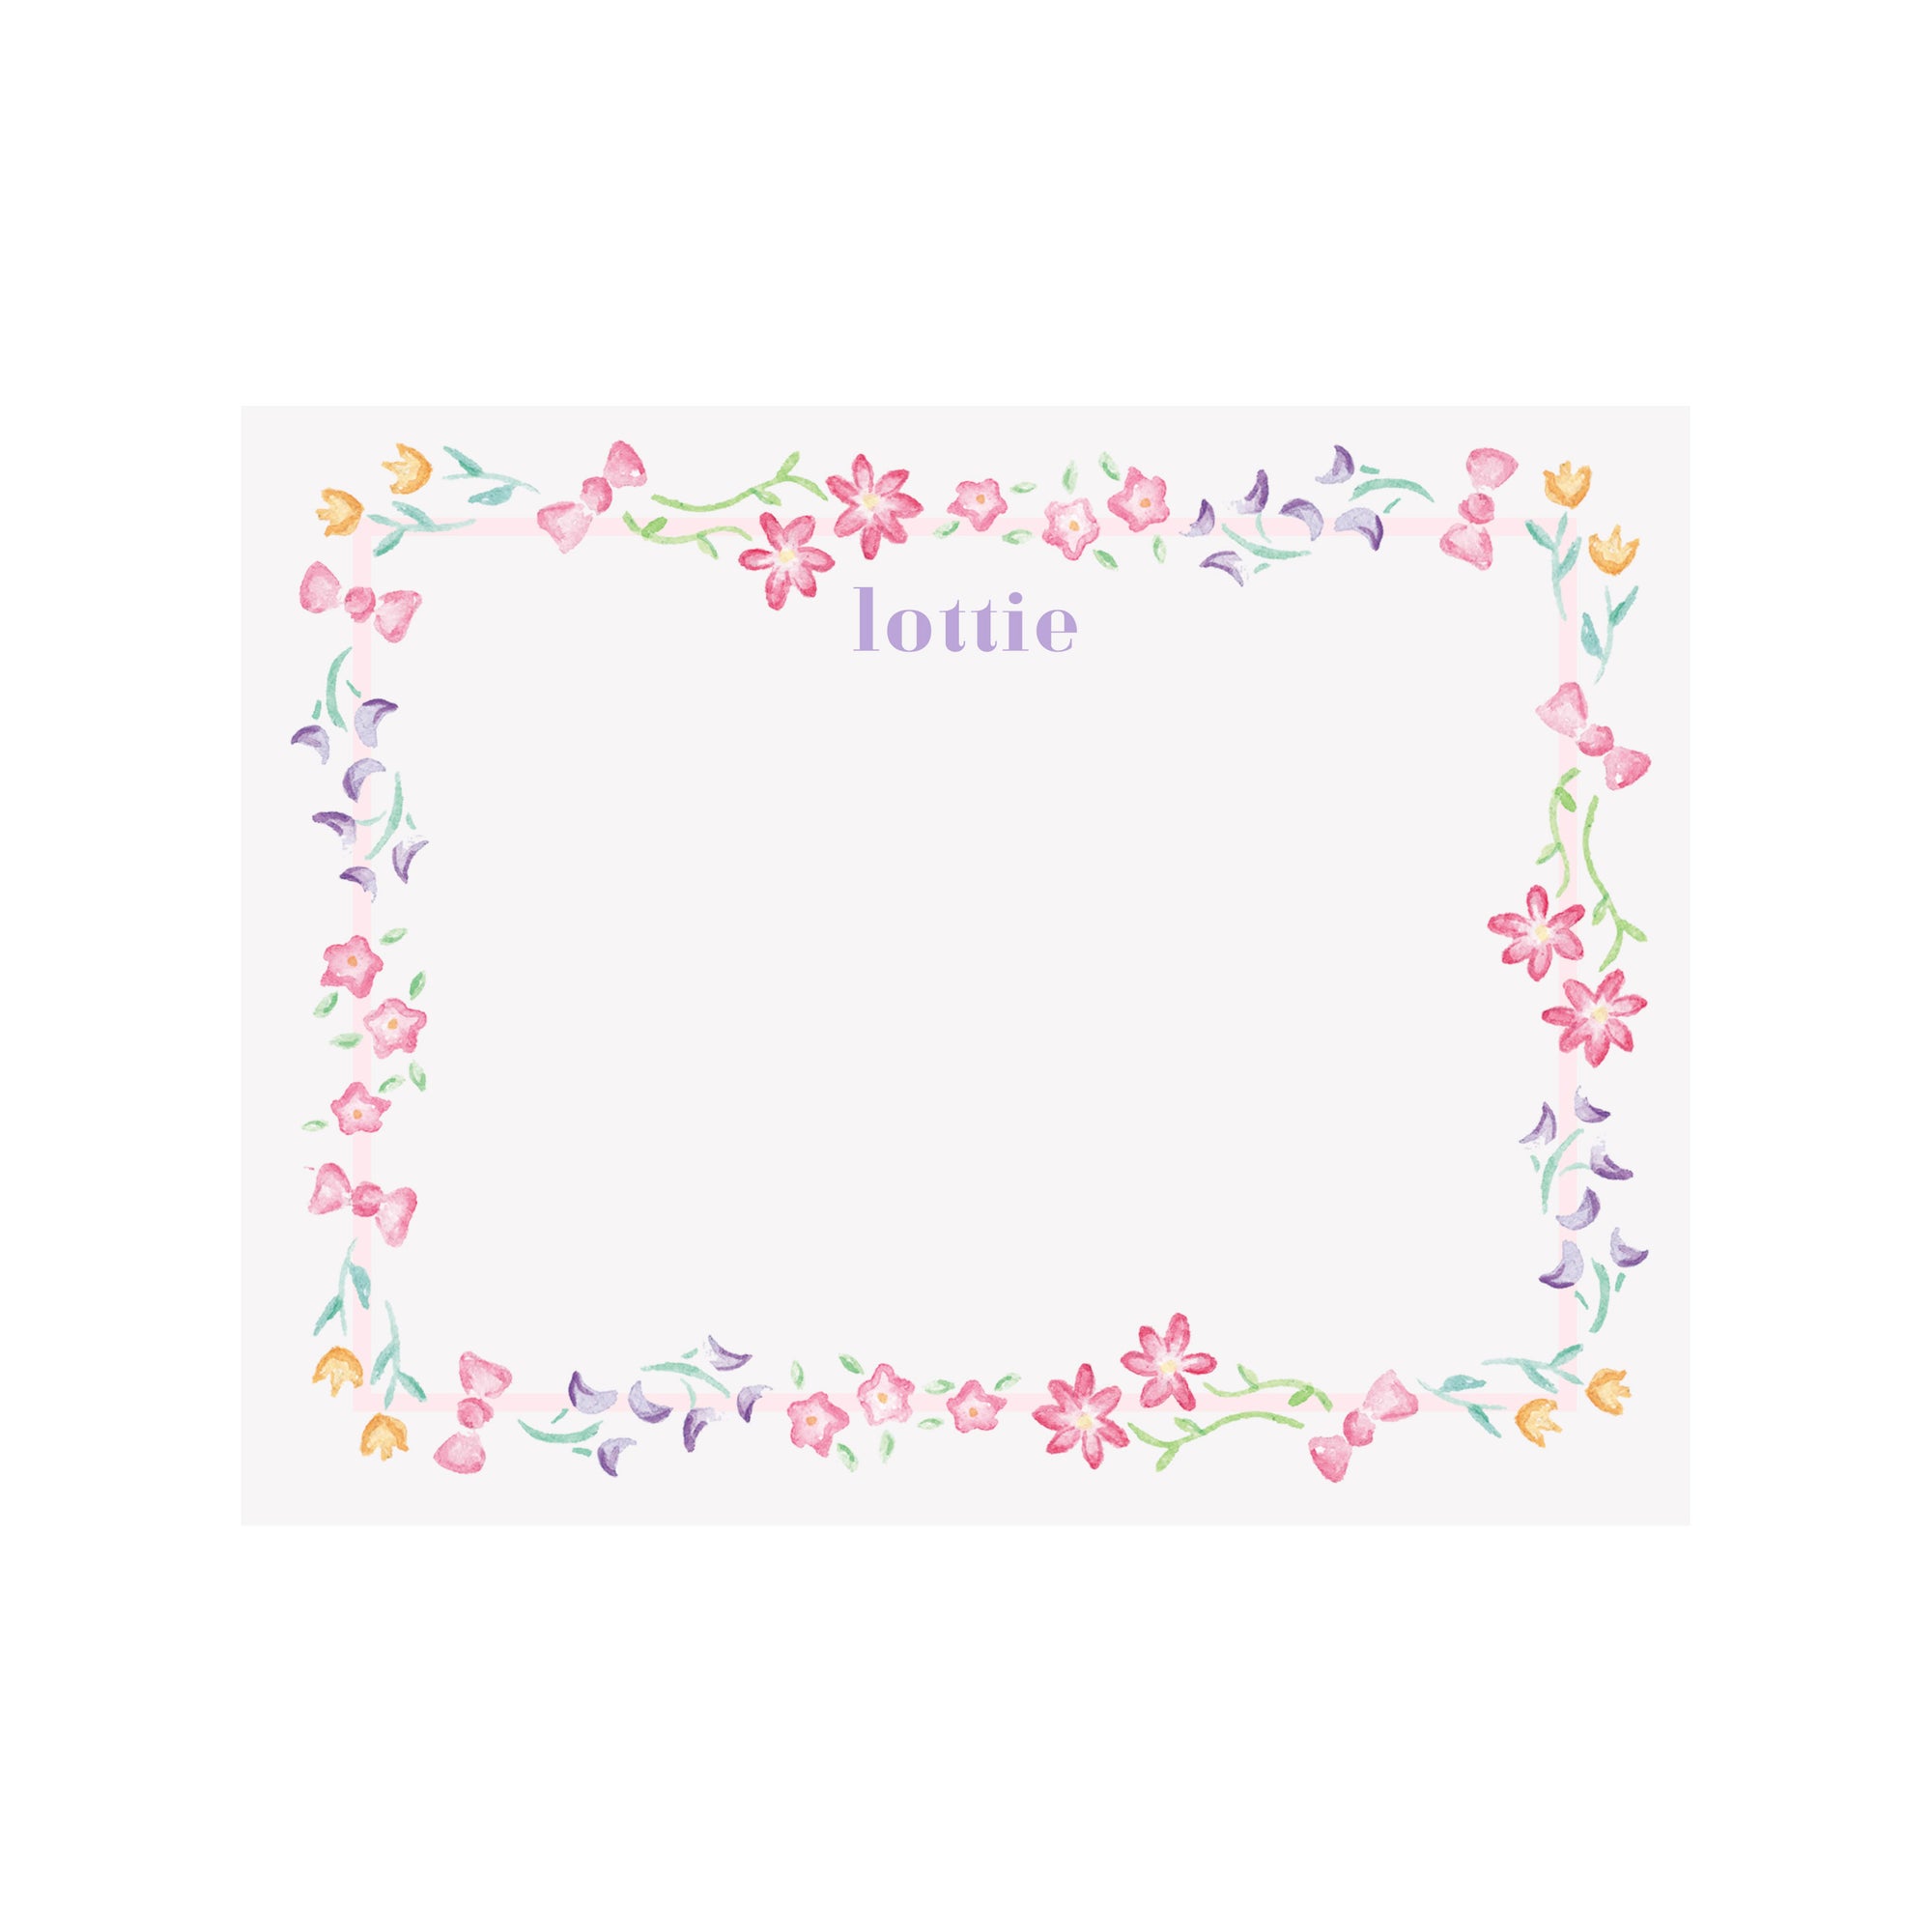 Flowers & Bows Border Stationery